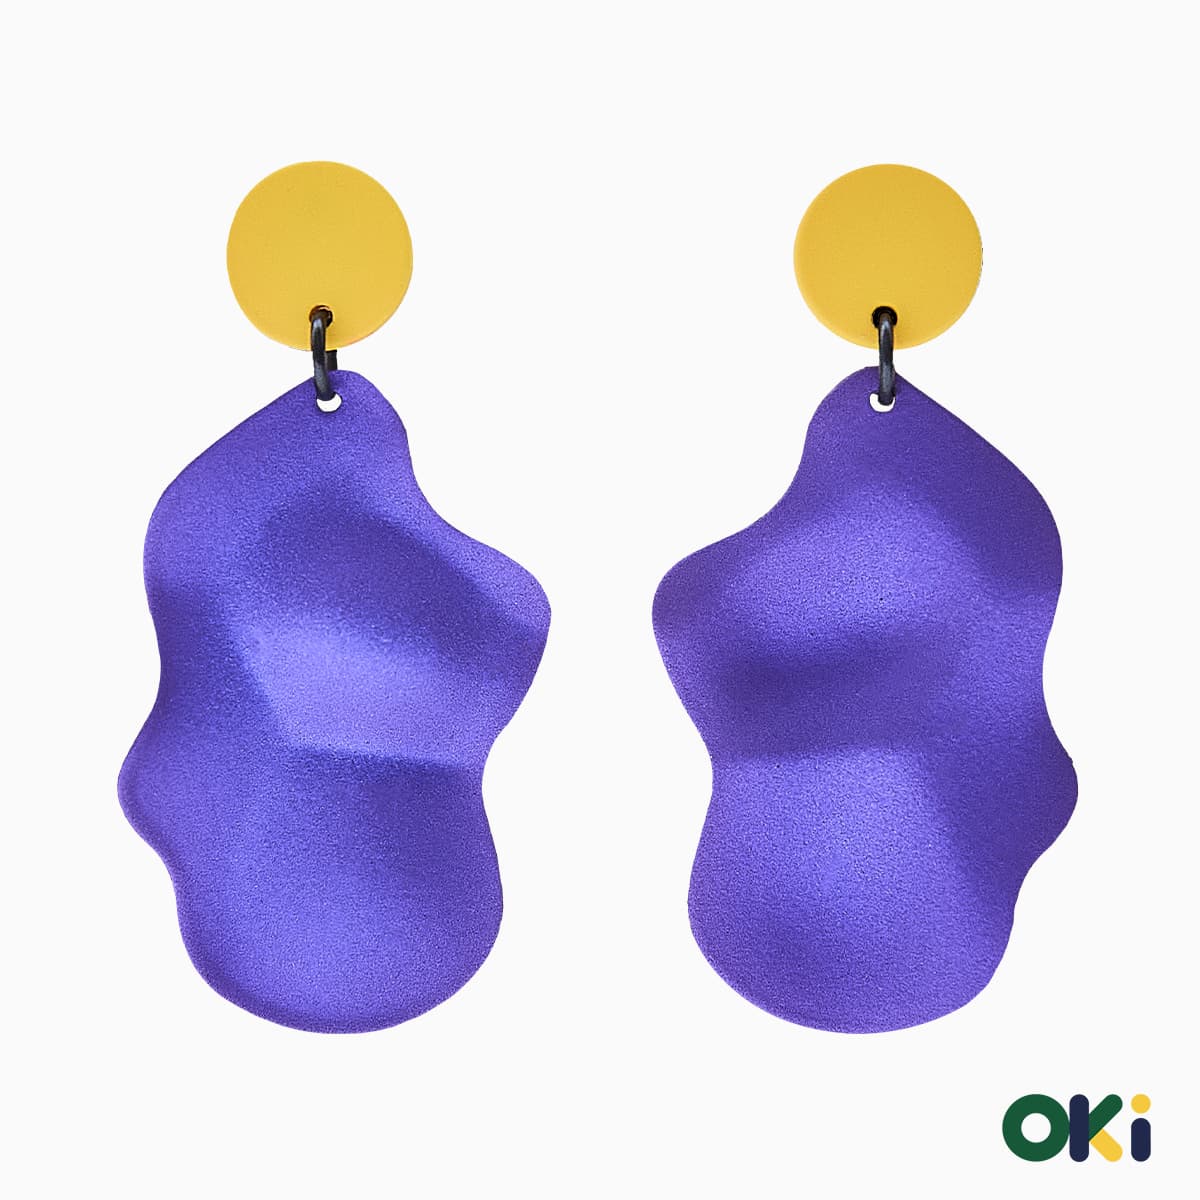 Mirage earrings OKi Fashion accessories jewely hypoallergenic